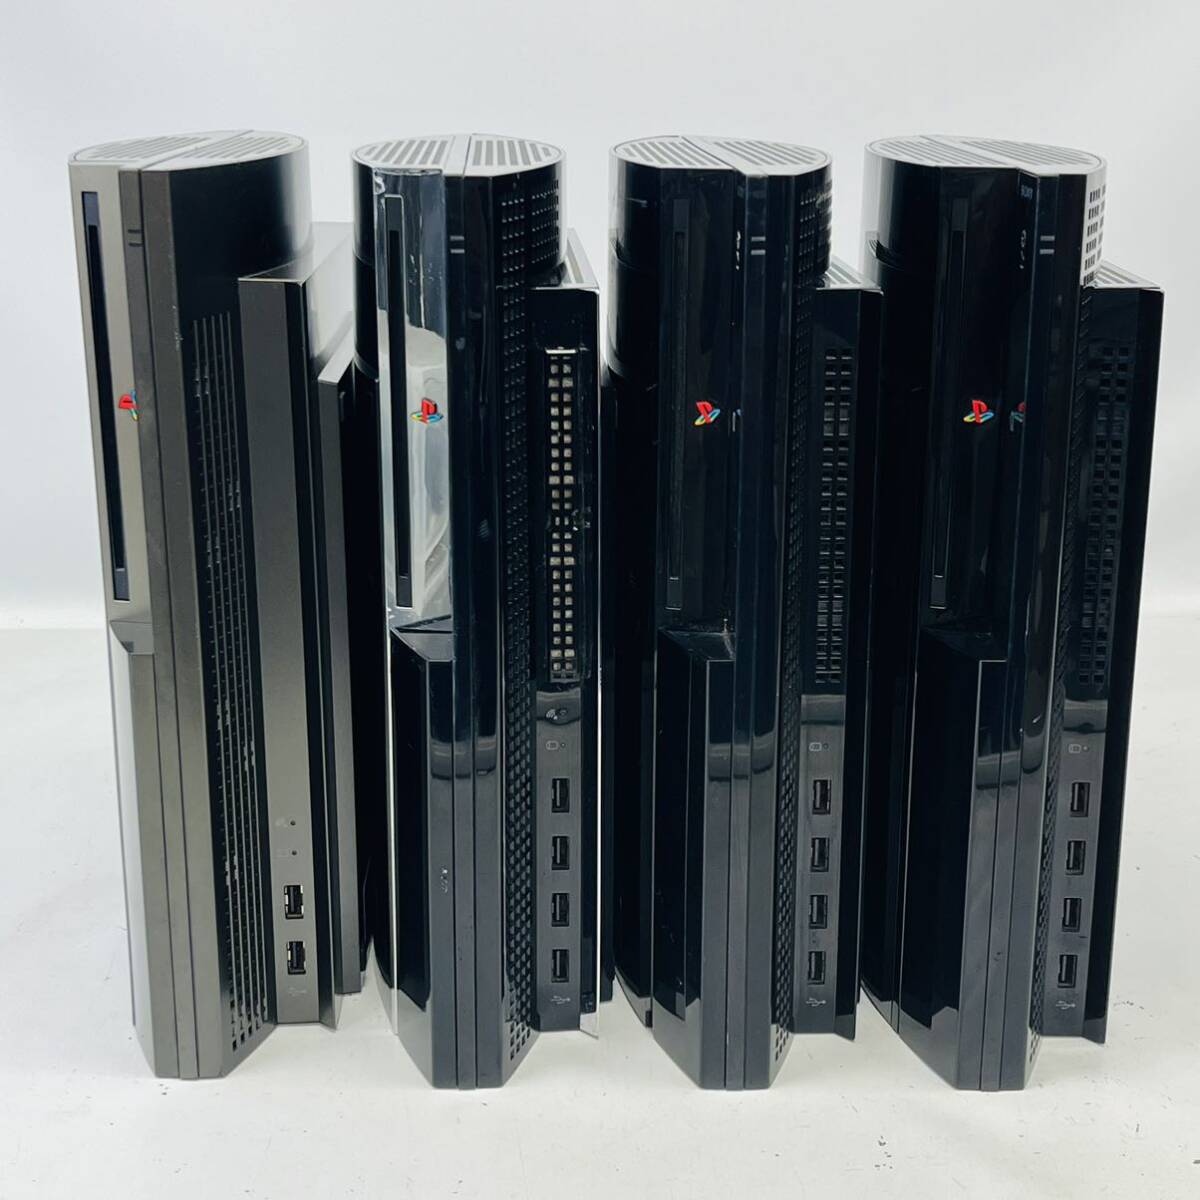 *1 jpy ~* SONY PS3 initial model body CECHA00 CECHB00 CECHH00 together 4 pcs. set Junk operation not yet verification PlayStation 3 set sale thickness type ⑧